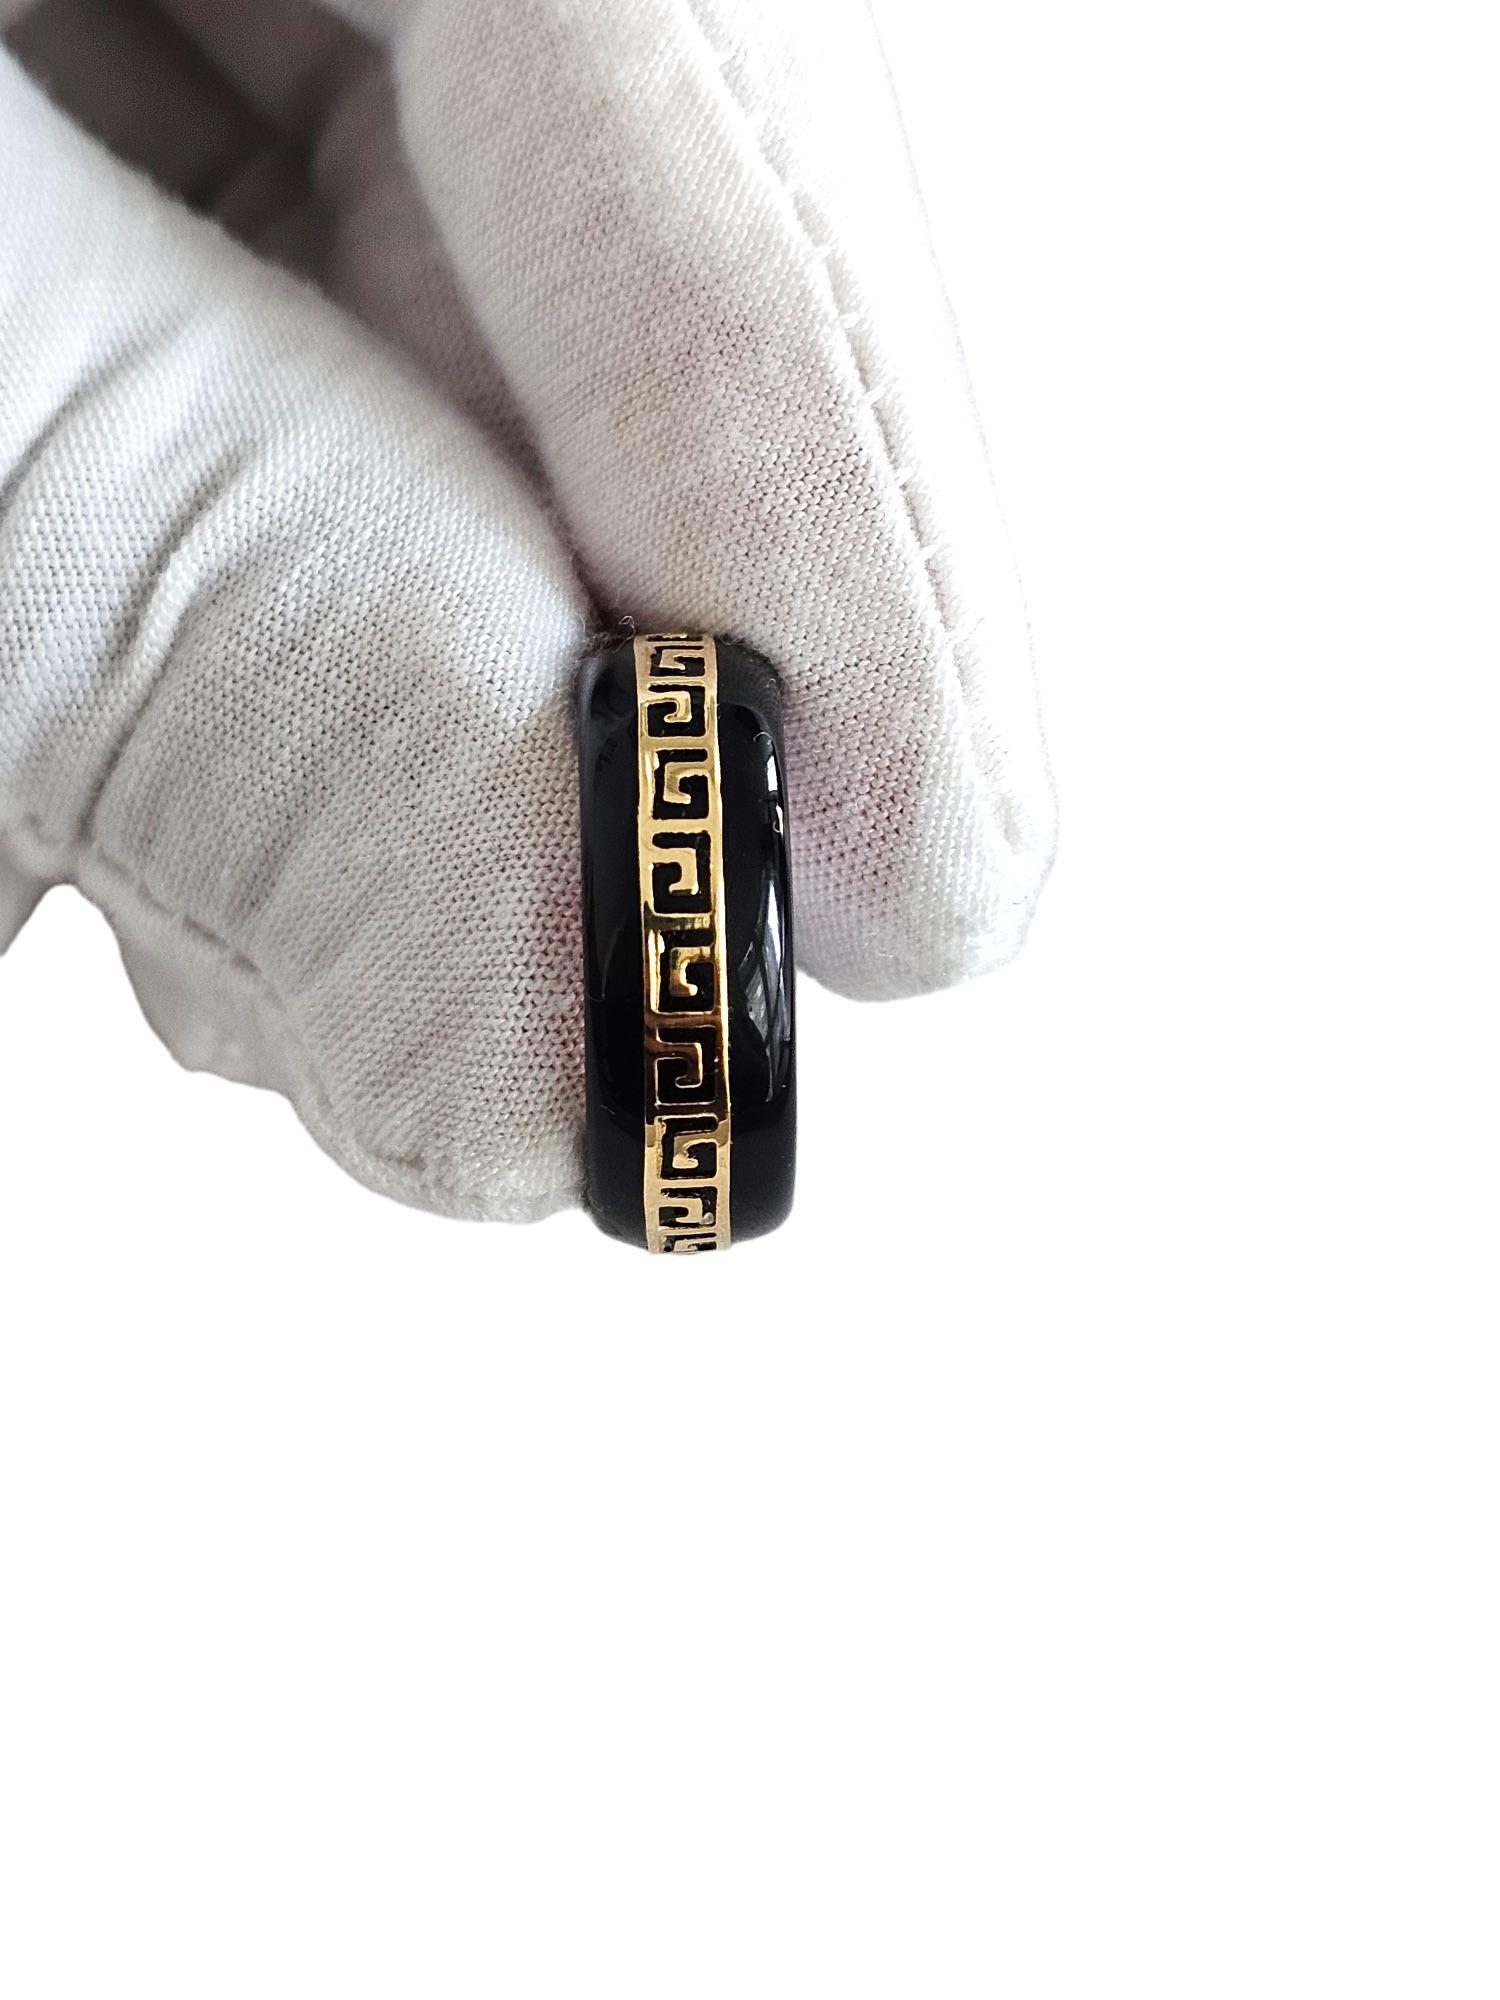 Li Black Onyx Band Ring (With 14k Solid Gold) - Cocktail Ring for Men and Women In New Condition For Sale In Kowloon, HK